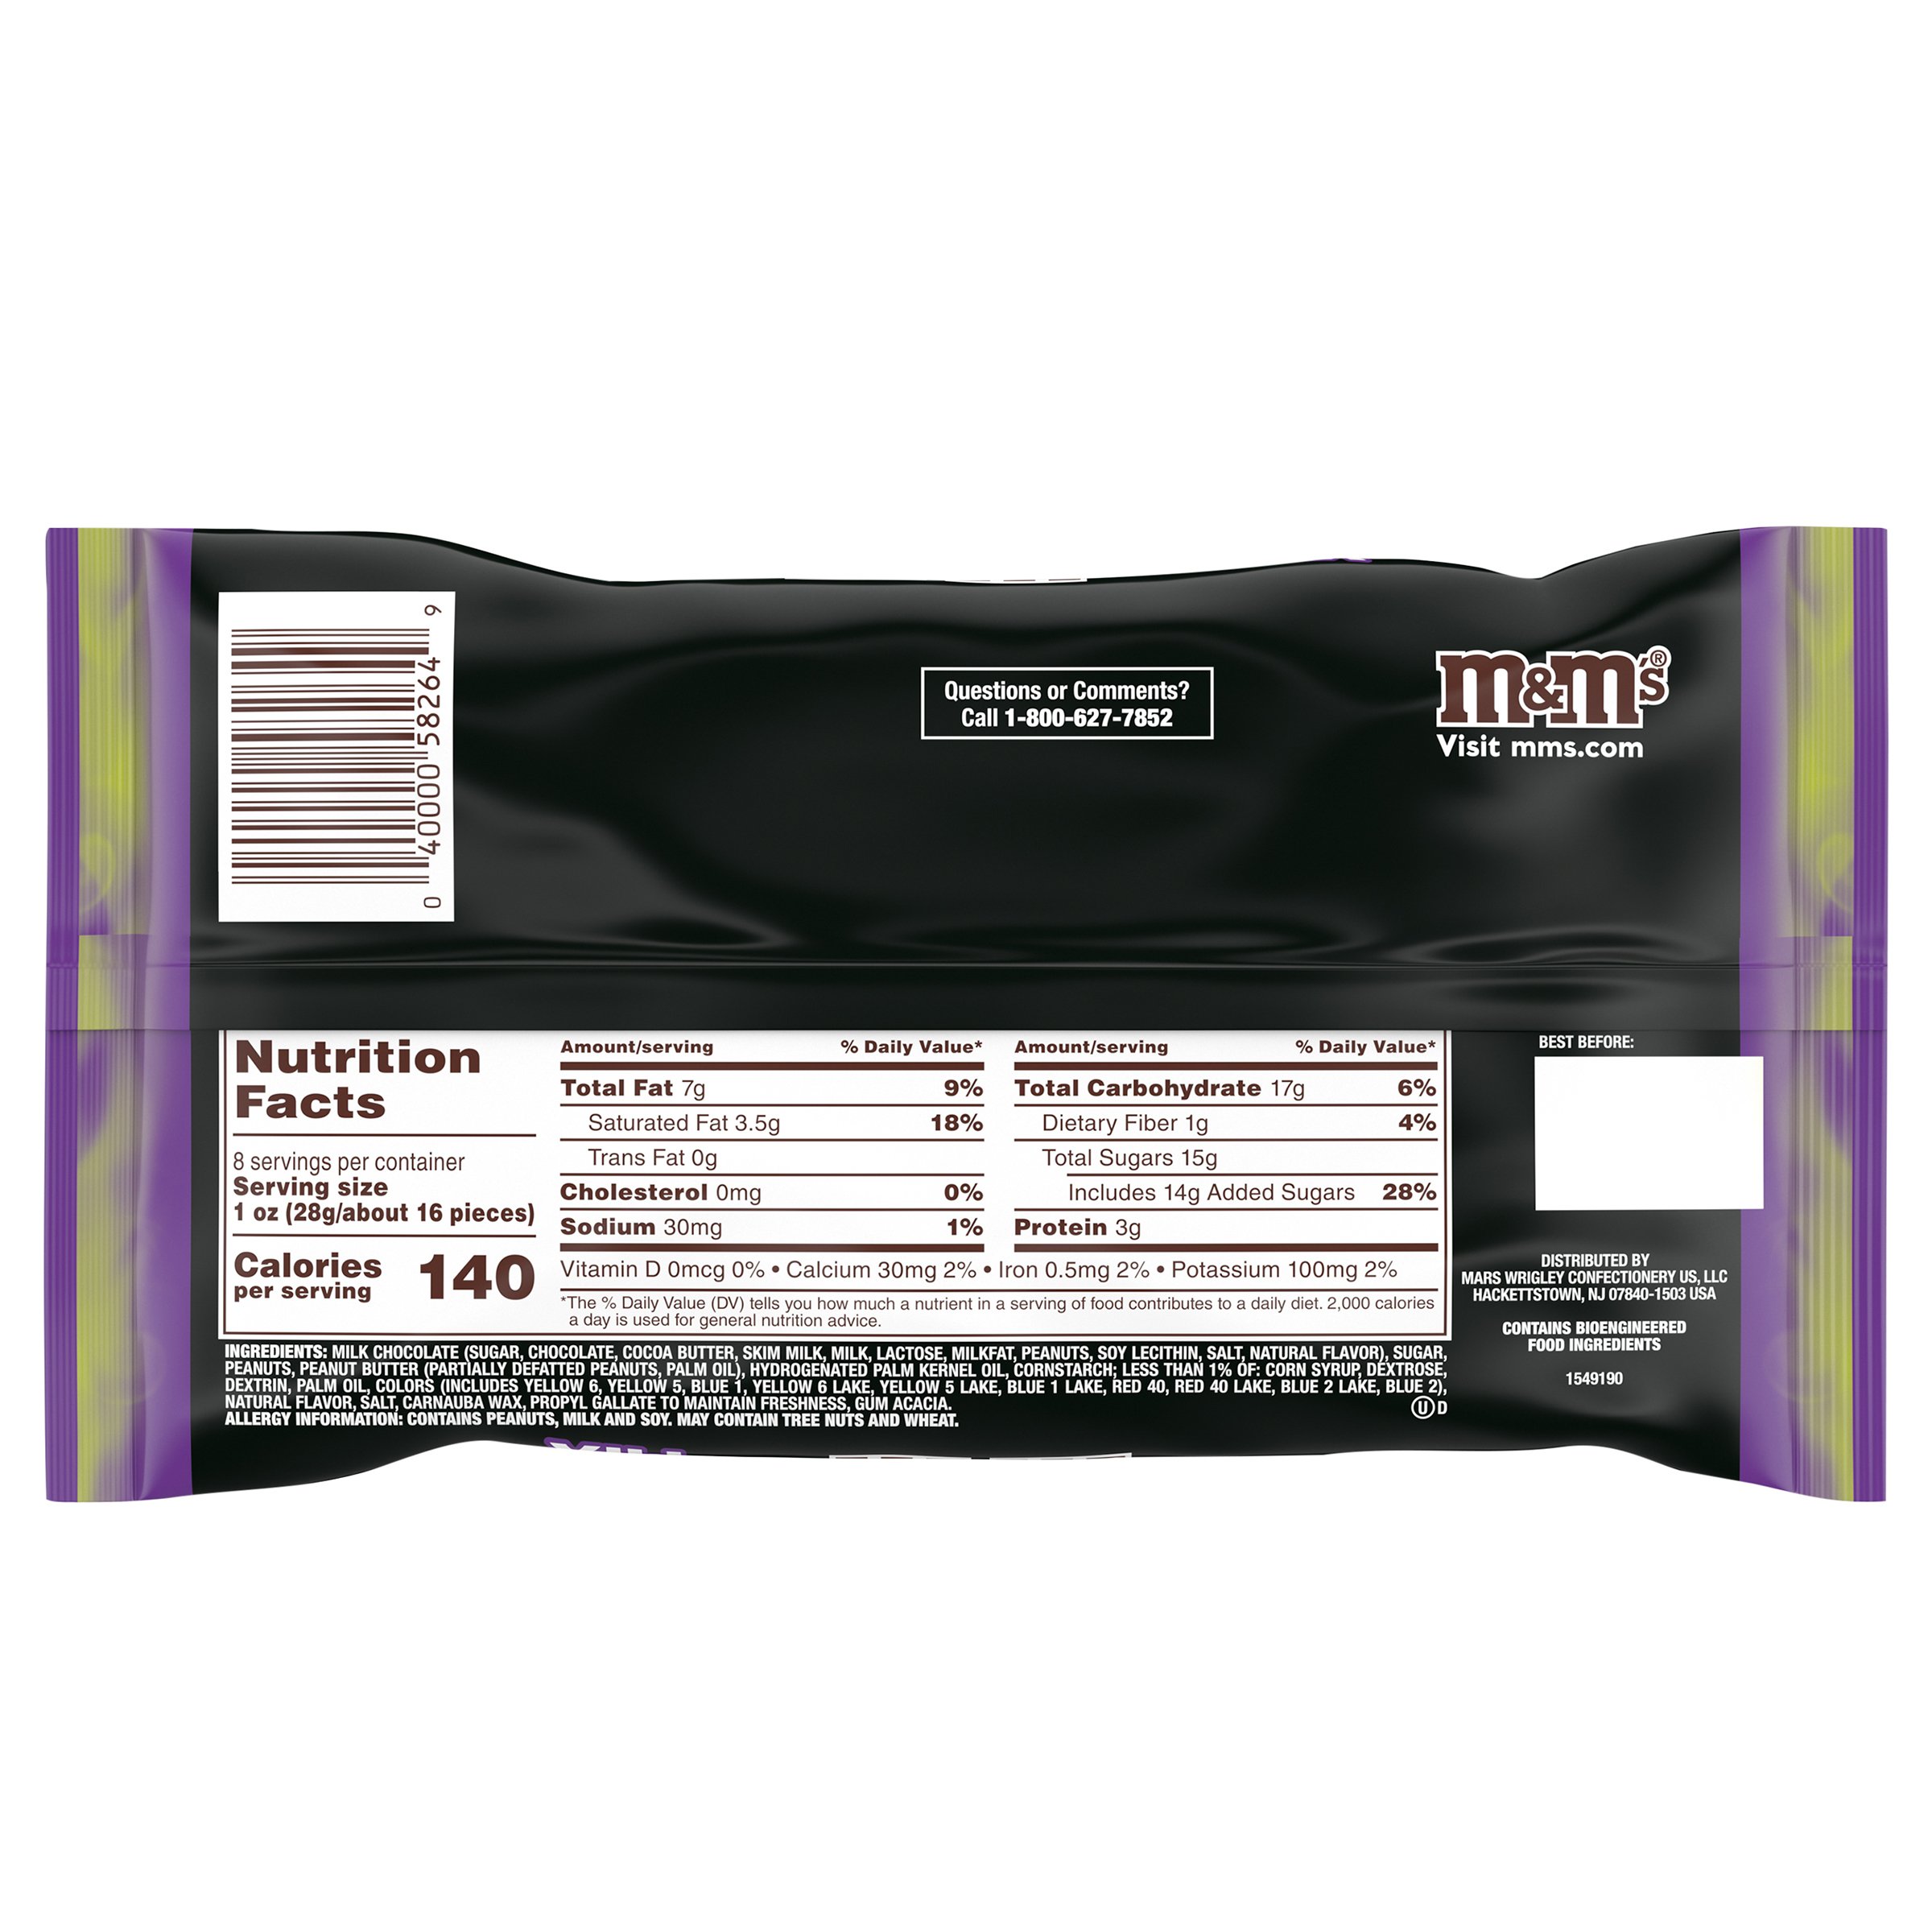 M&M'S Mad Scientist Assorted Chocolate Halloween Candy - 8 oz Bag 